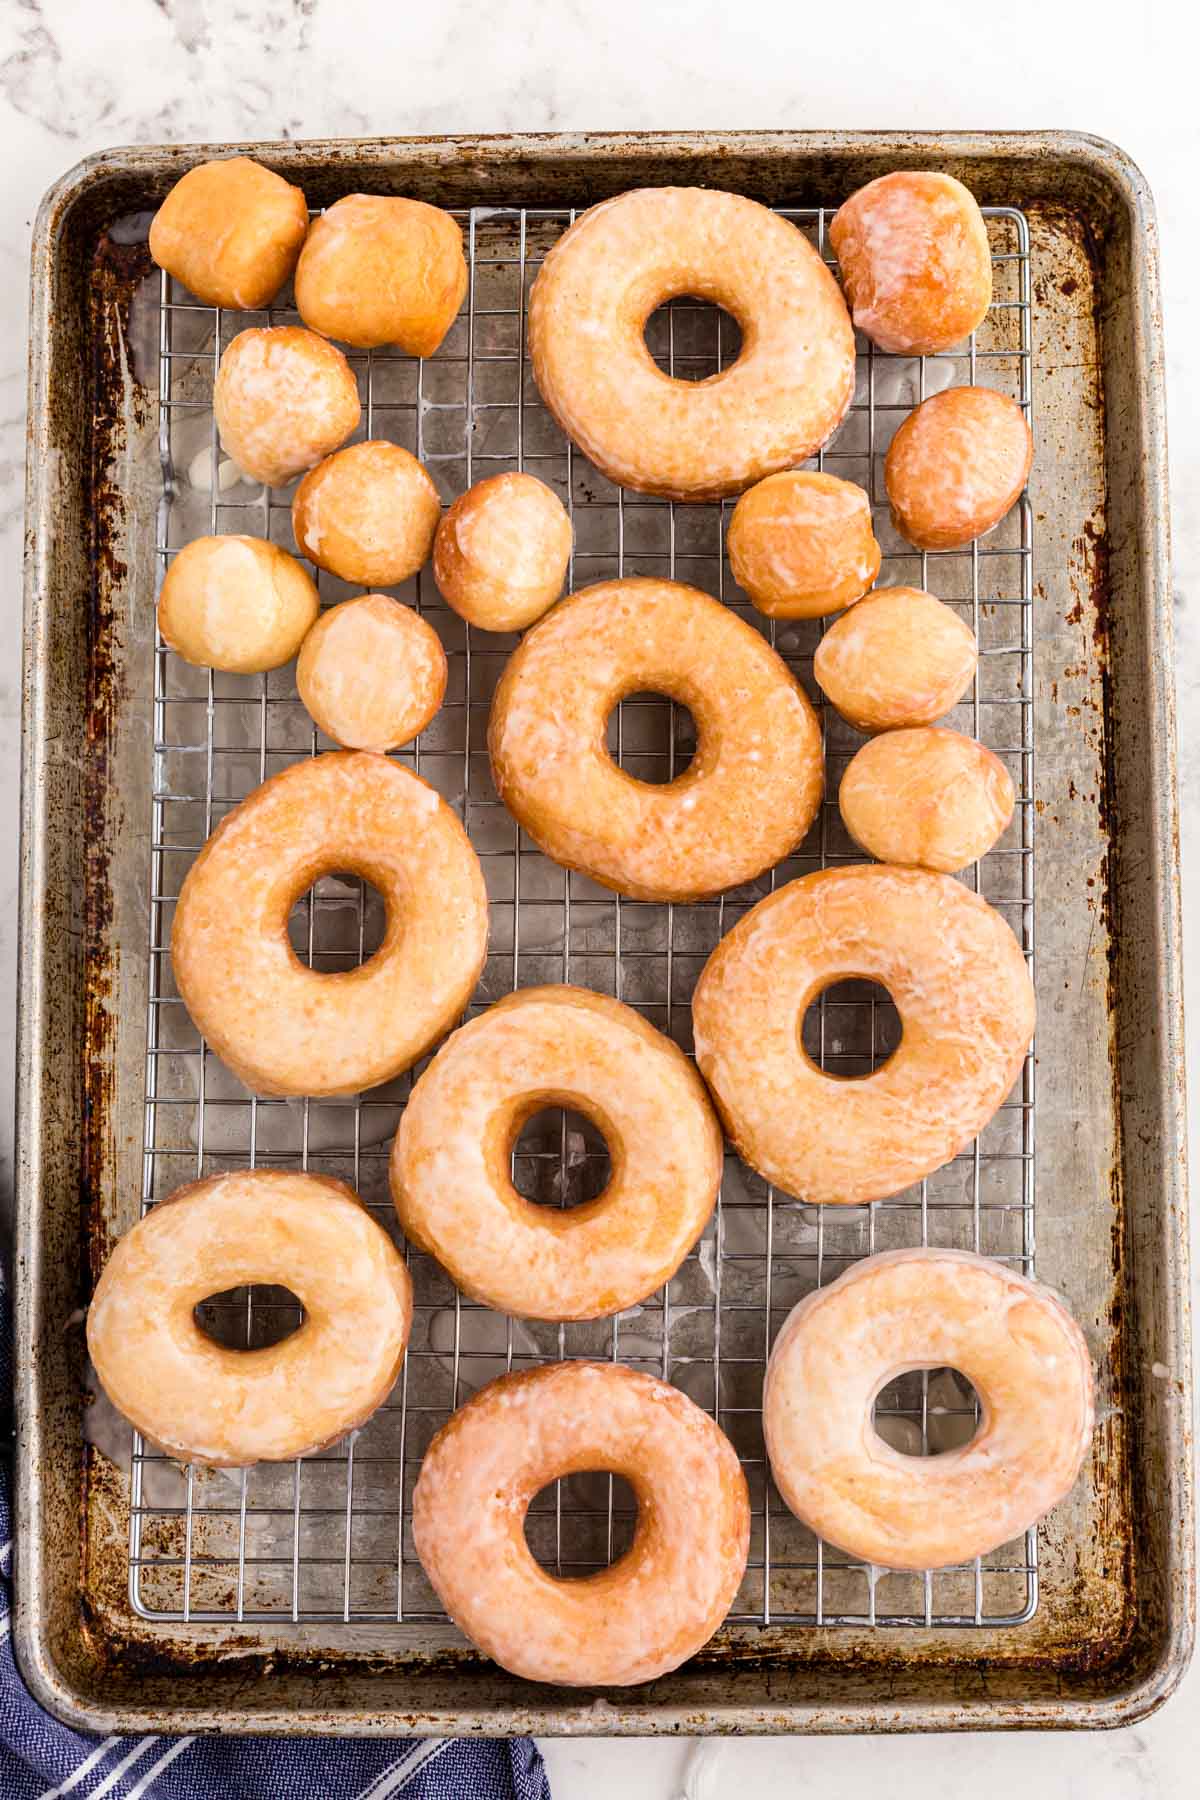 Sourdough donuts on a wire rack on a baking sheet.